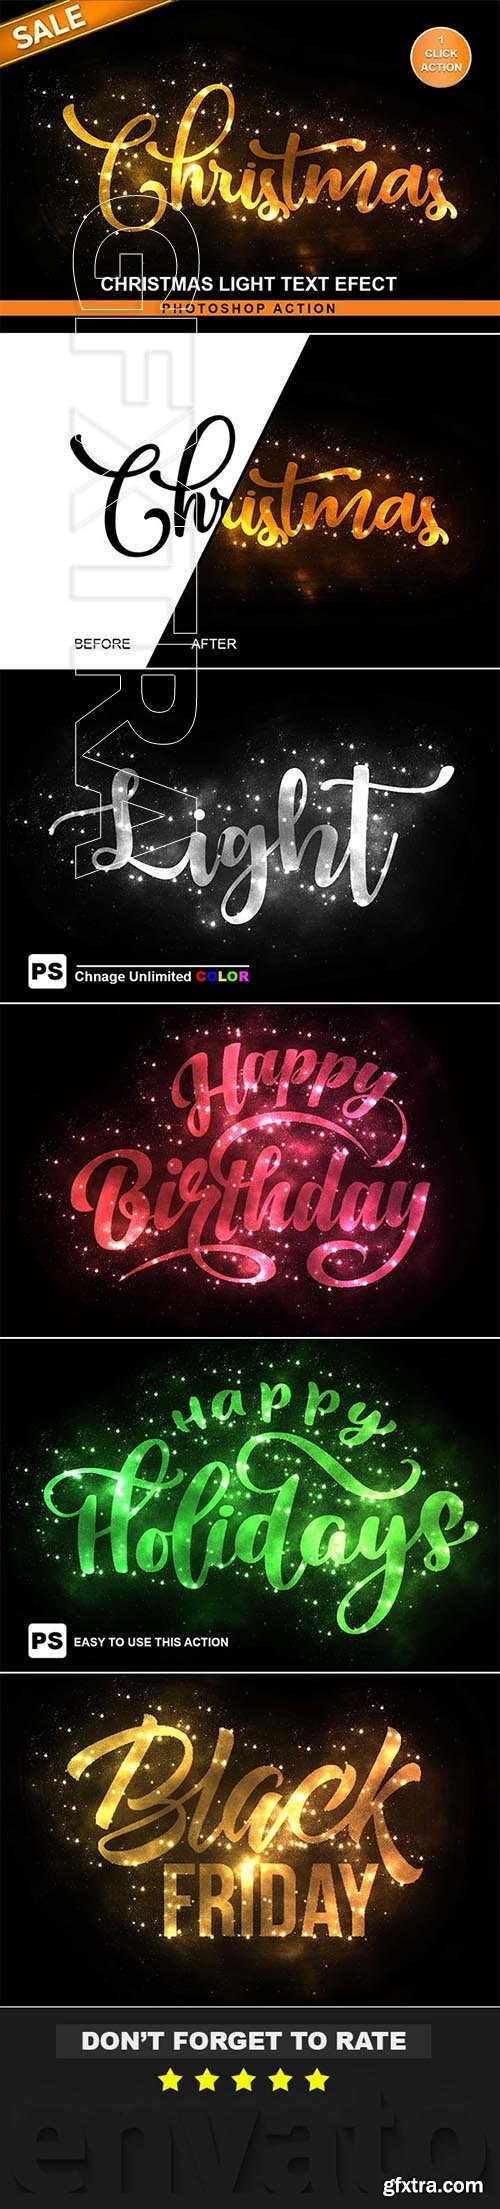 GraphicRiver - Christmas Text Effect Photoshop Action 22681467